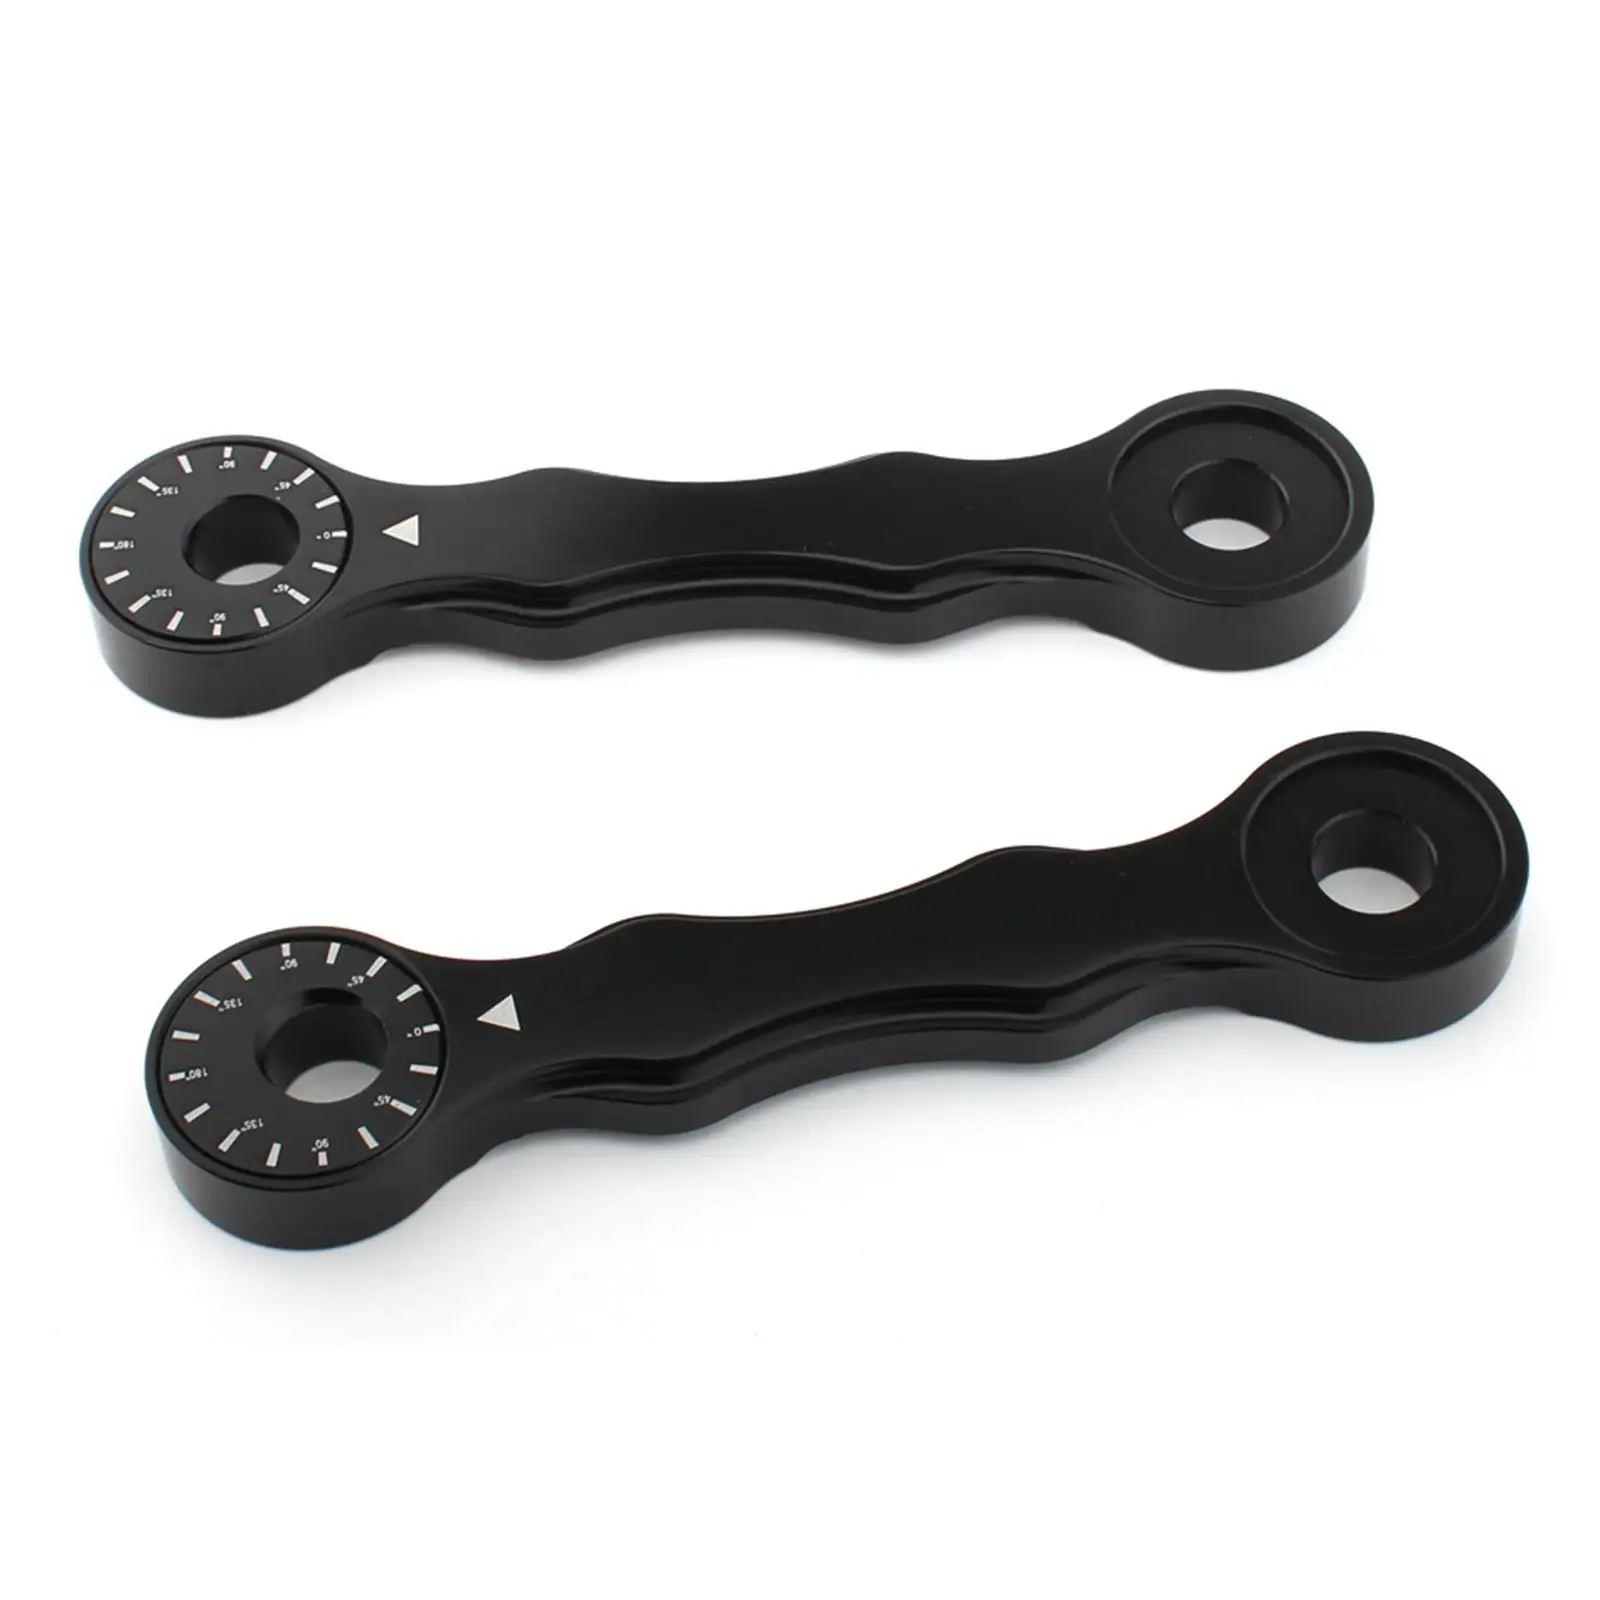 2x Motorcycle Lowering Links set Durable Spare Parts Black Dog Bones Linkages Replaces for Suzuki RM125 200 Drz400 E S SM